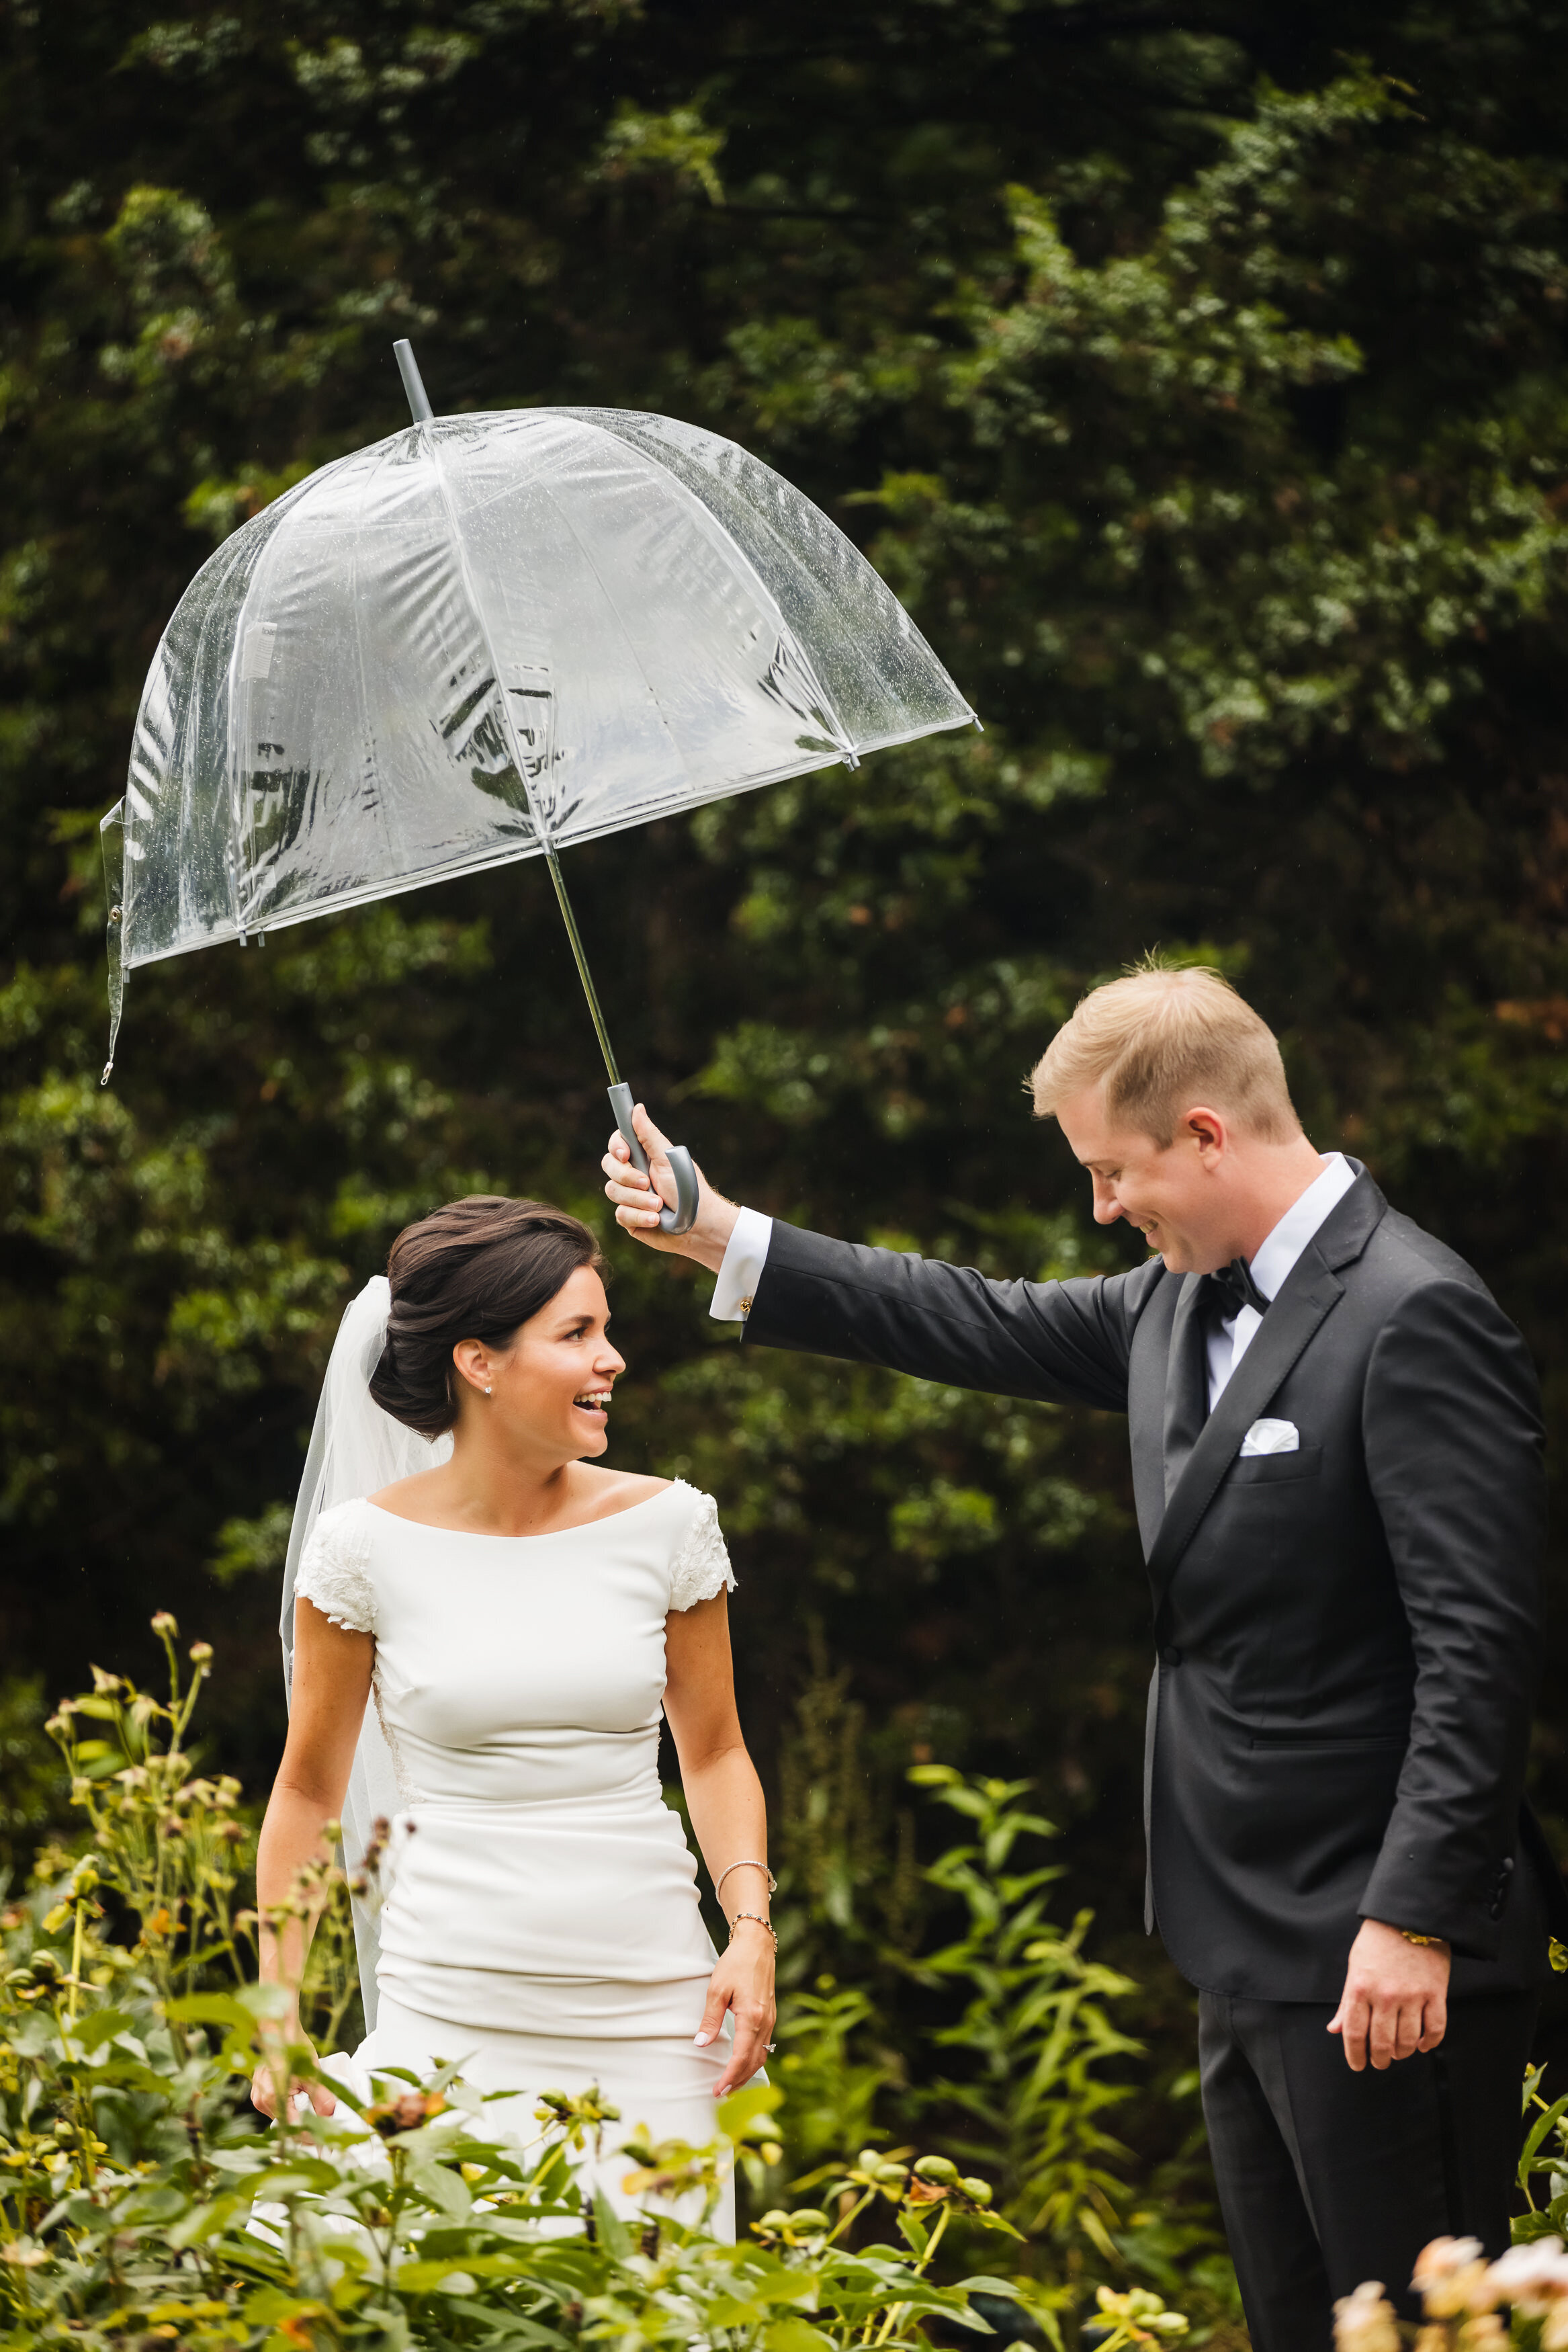 Bride and groom seeing each other for the first time on their rainy wedding  in Philadelphia, holding an umbrella